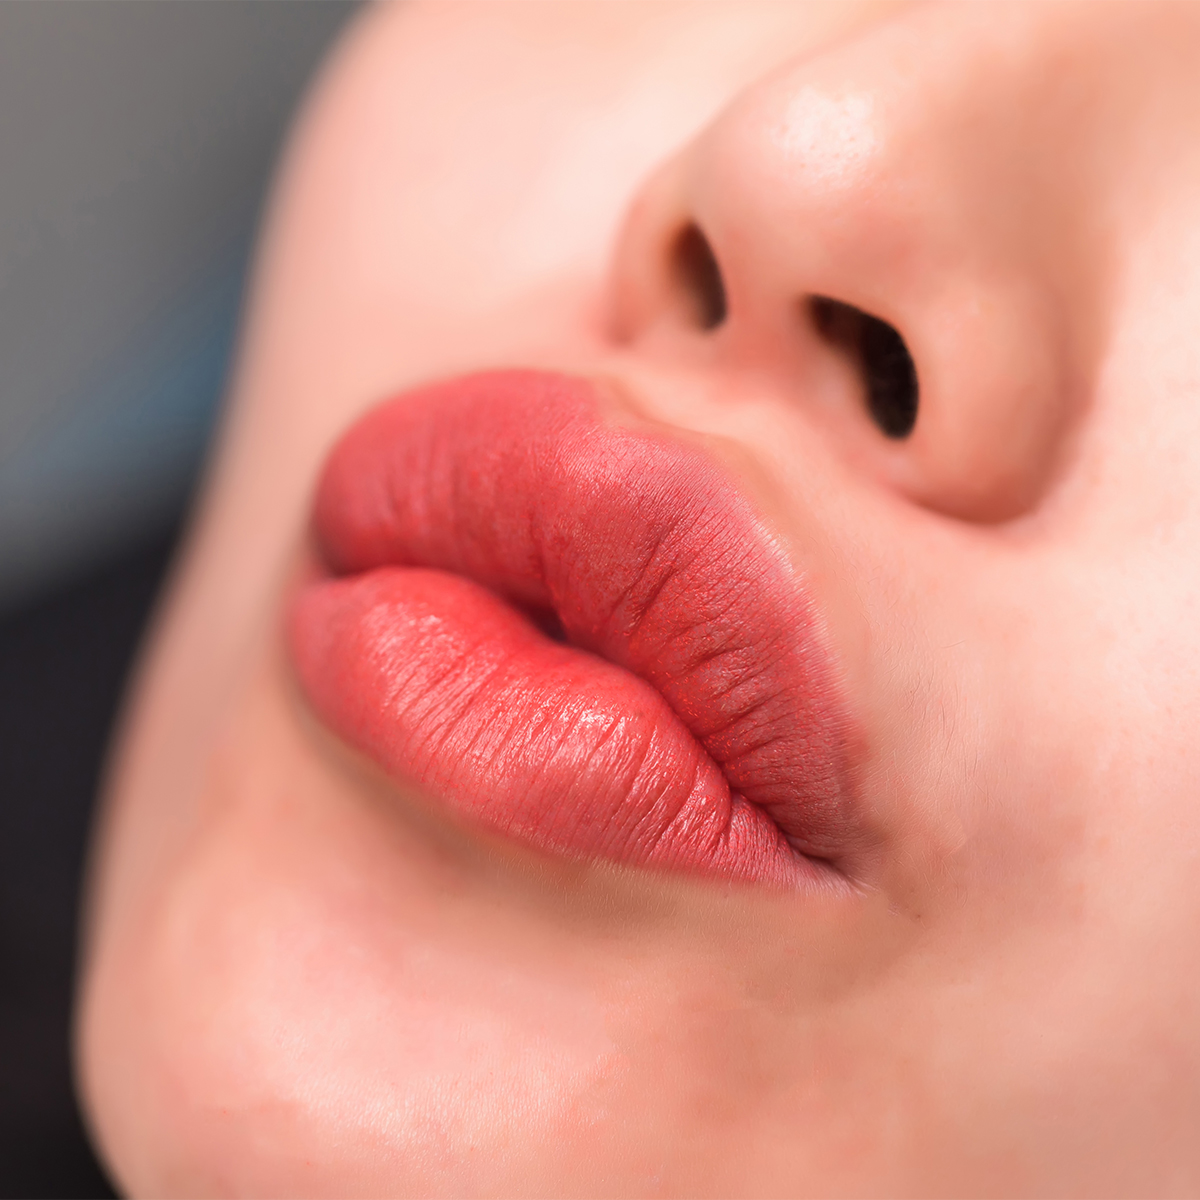 plump kissy face red lips close-up shot